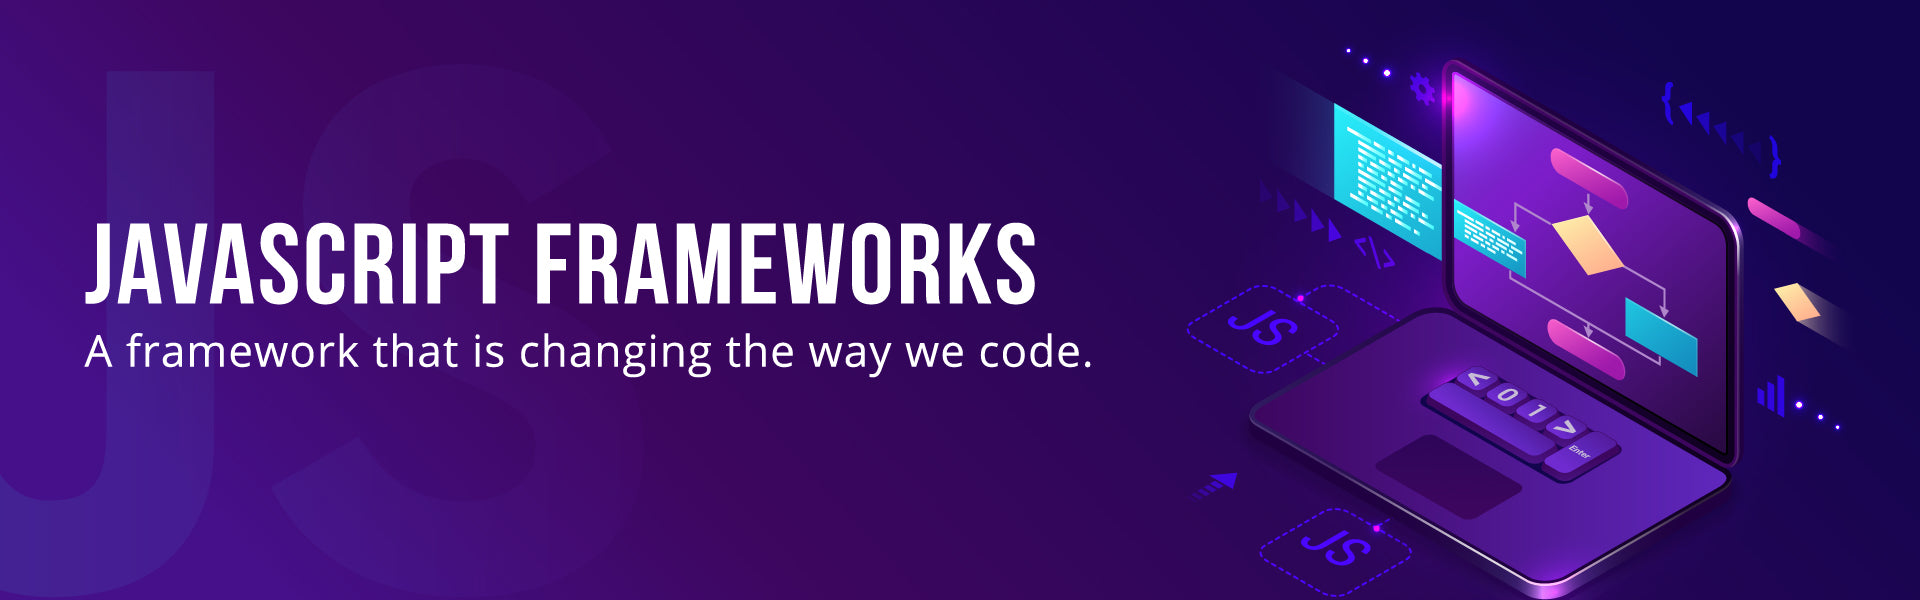 JavaScript Framework - A framework that is changing the way we code.